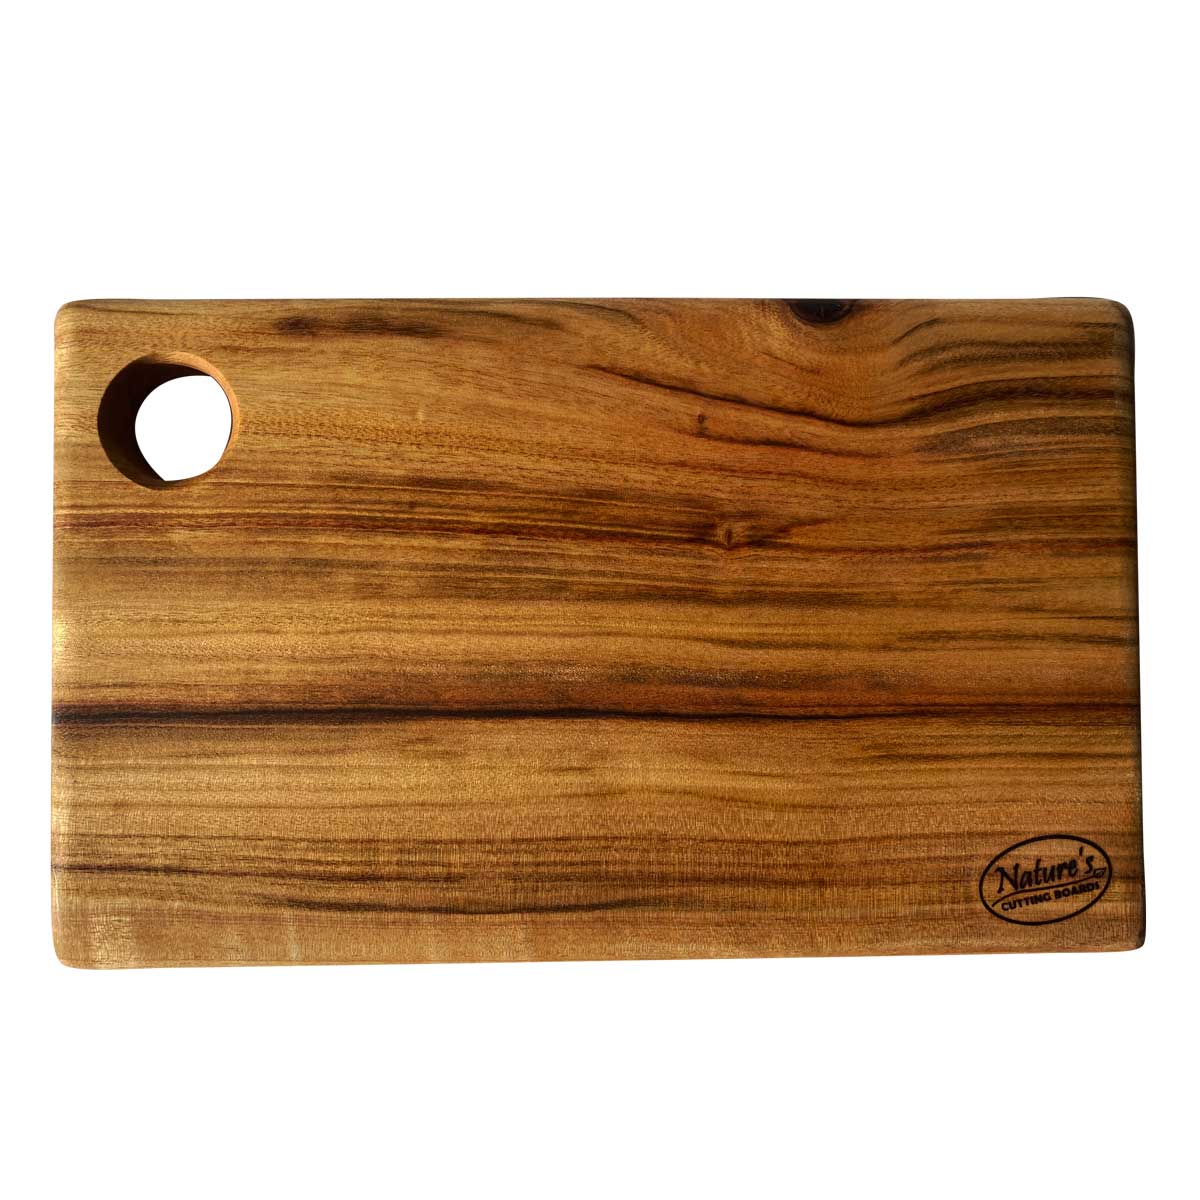 A small rectangular camphor laurel wood cutting board from Nature's Boards, designed with a round hole in the corner for easy handleing and hanging